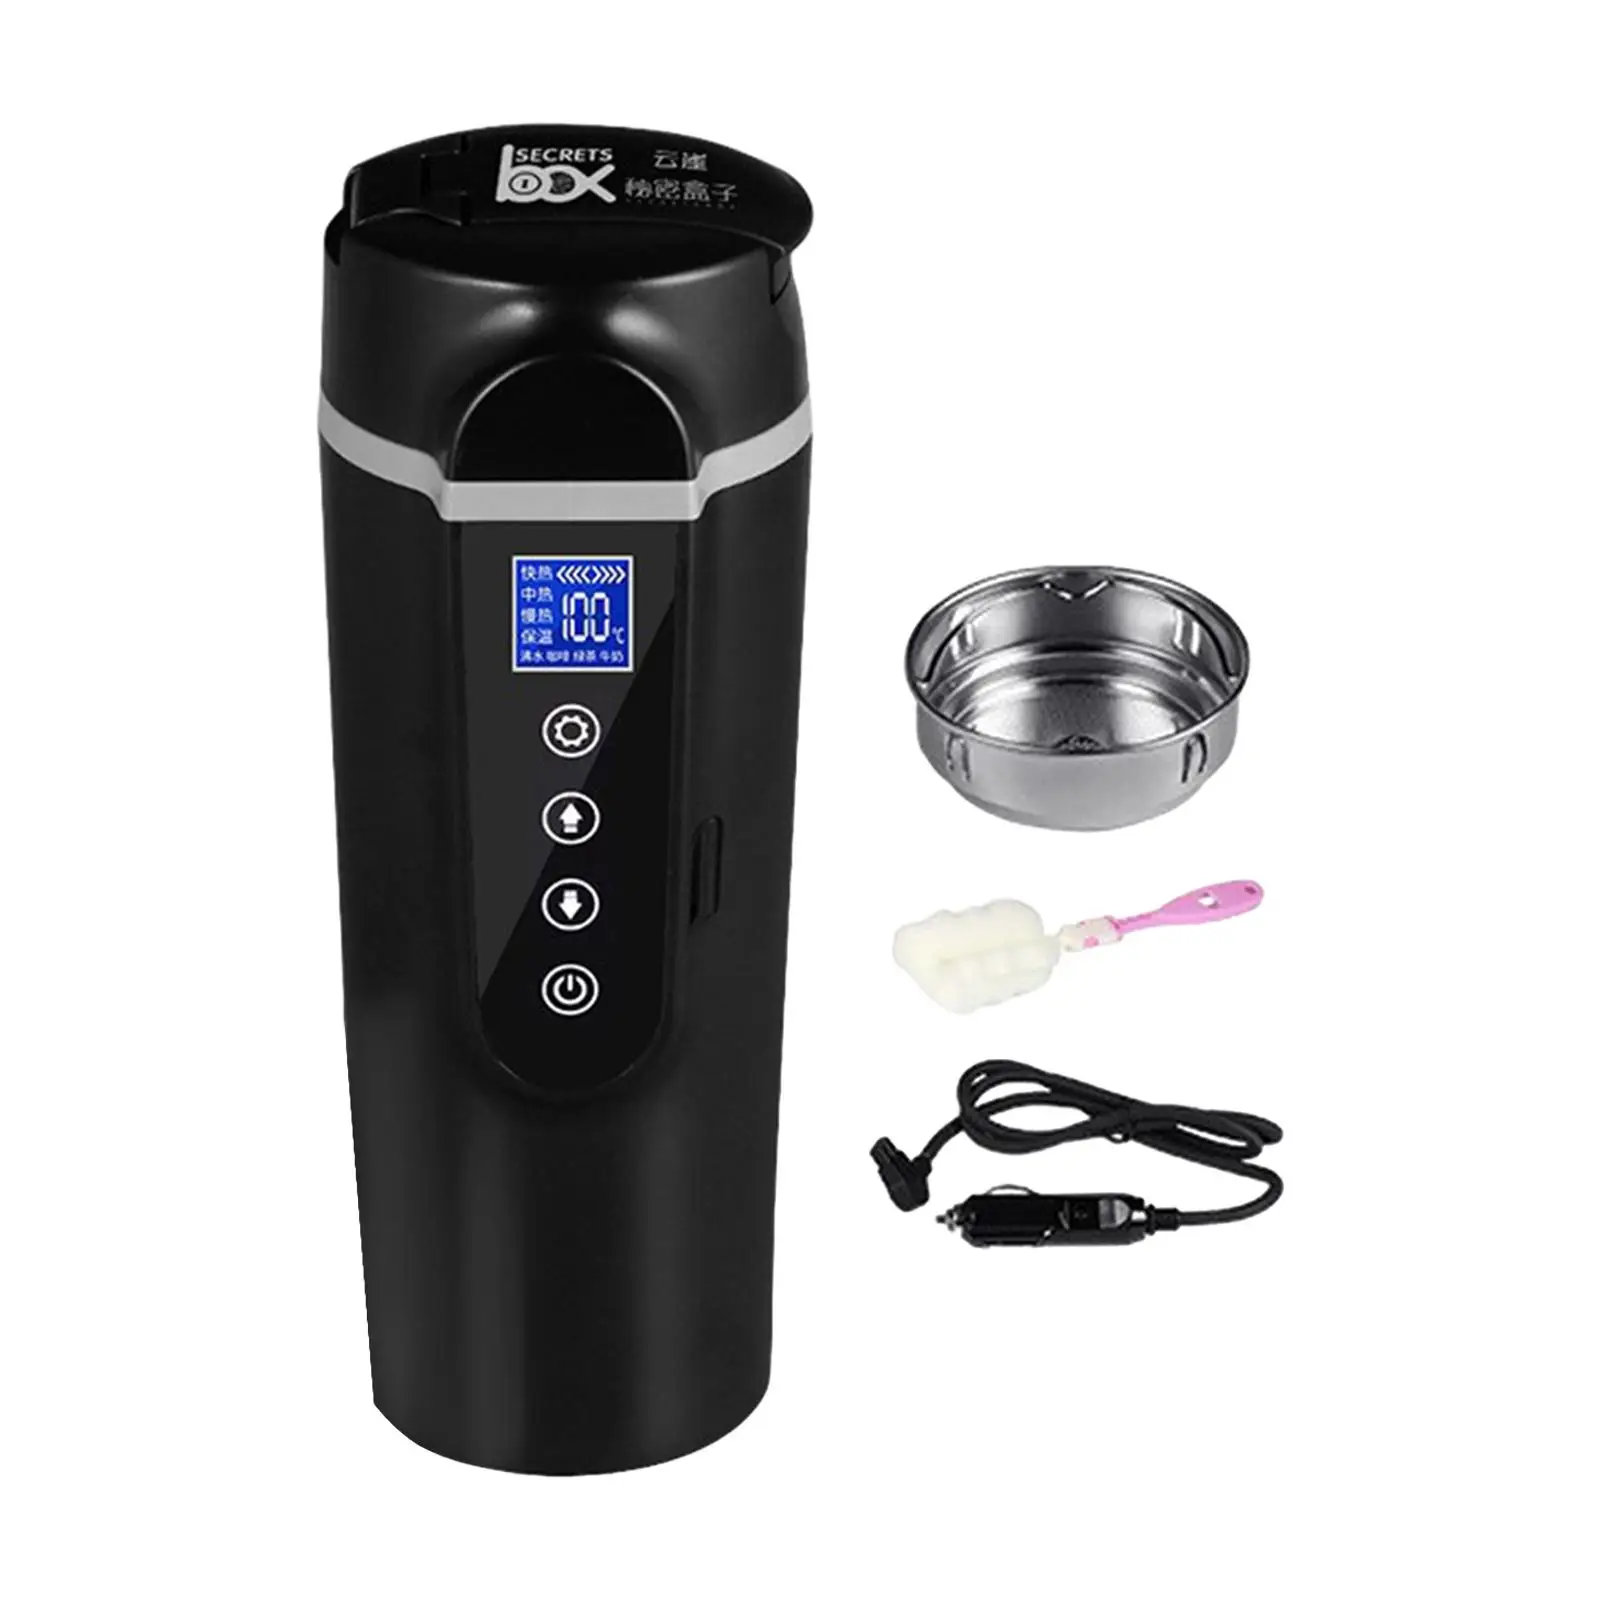 Car Heating Cup Quick Heating Intelligent Drinking Bottle Travel Coffee Mug for Trip Drivers Airplane Car Truck Tea Water Milk